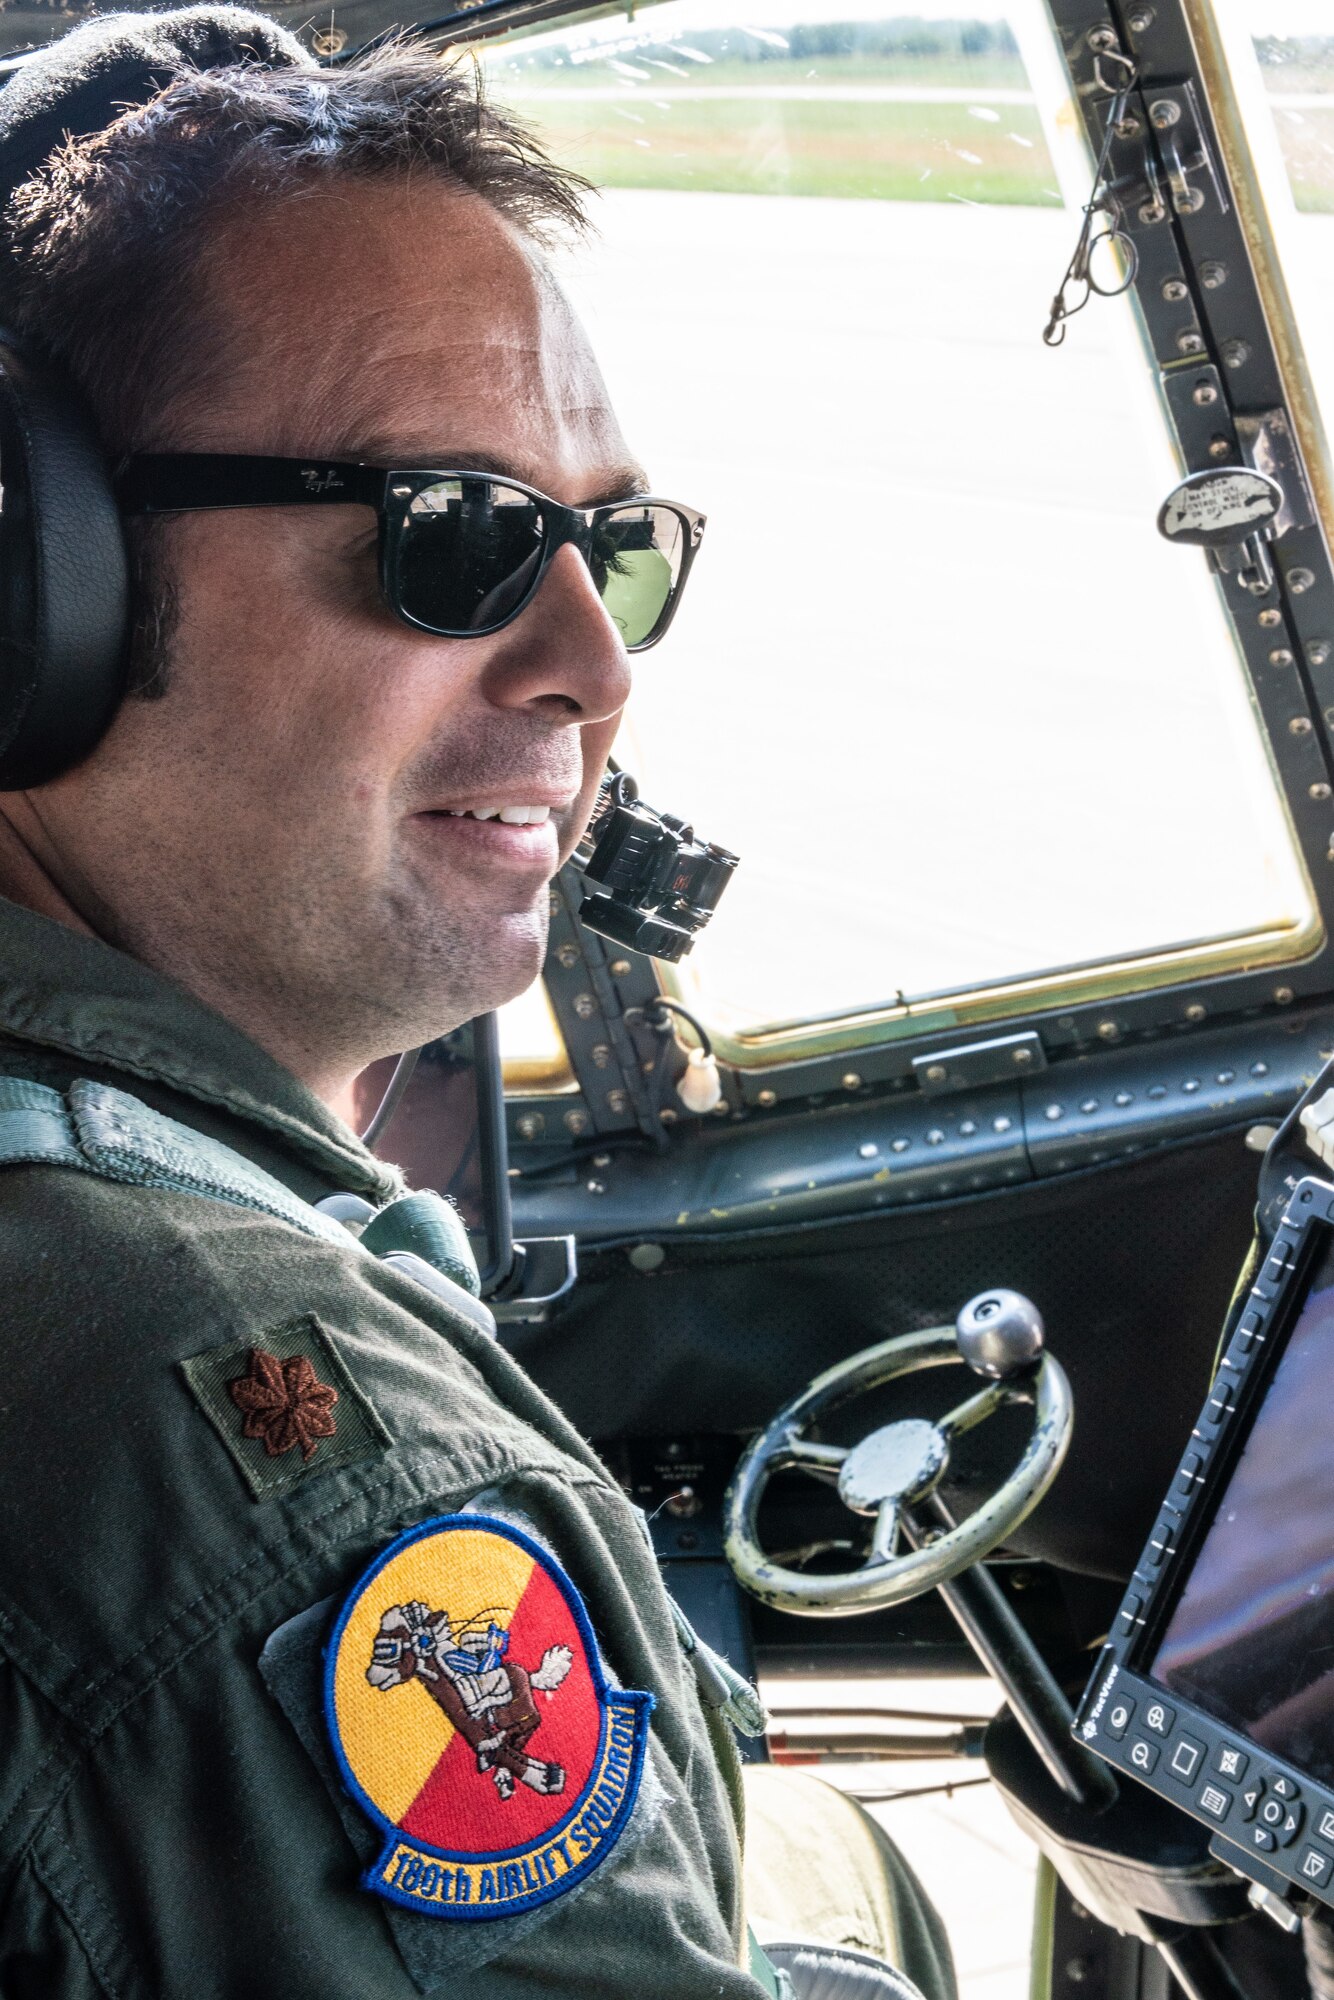 U.S. Air Force Maj. Ed Fattmann, a pilot assigned to the 180th Airlift Squadron, Missouri Air National Guard, takes his first flight as an aircraft commander with one eye, above St. Joseph, Missouri, Sept. 4, 2019. Fattman has been a pilot with the 180th AS since 2009, but was put on ‘duty not including flying’ status after losing sight in his right eye from a firework misfire in 2012. For his first flight back in military status, he flew with his original crew from his first deployment to Afghanistan in 2010. (U.S. Air National Guard photo by Tech. Sgt. Patrick Evenson)